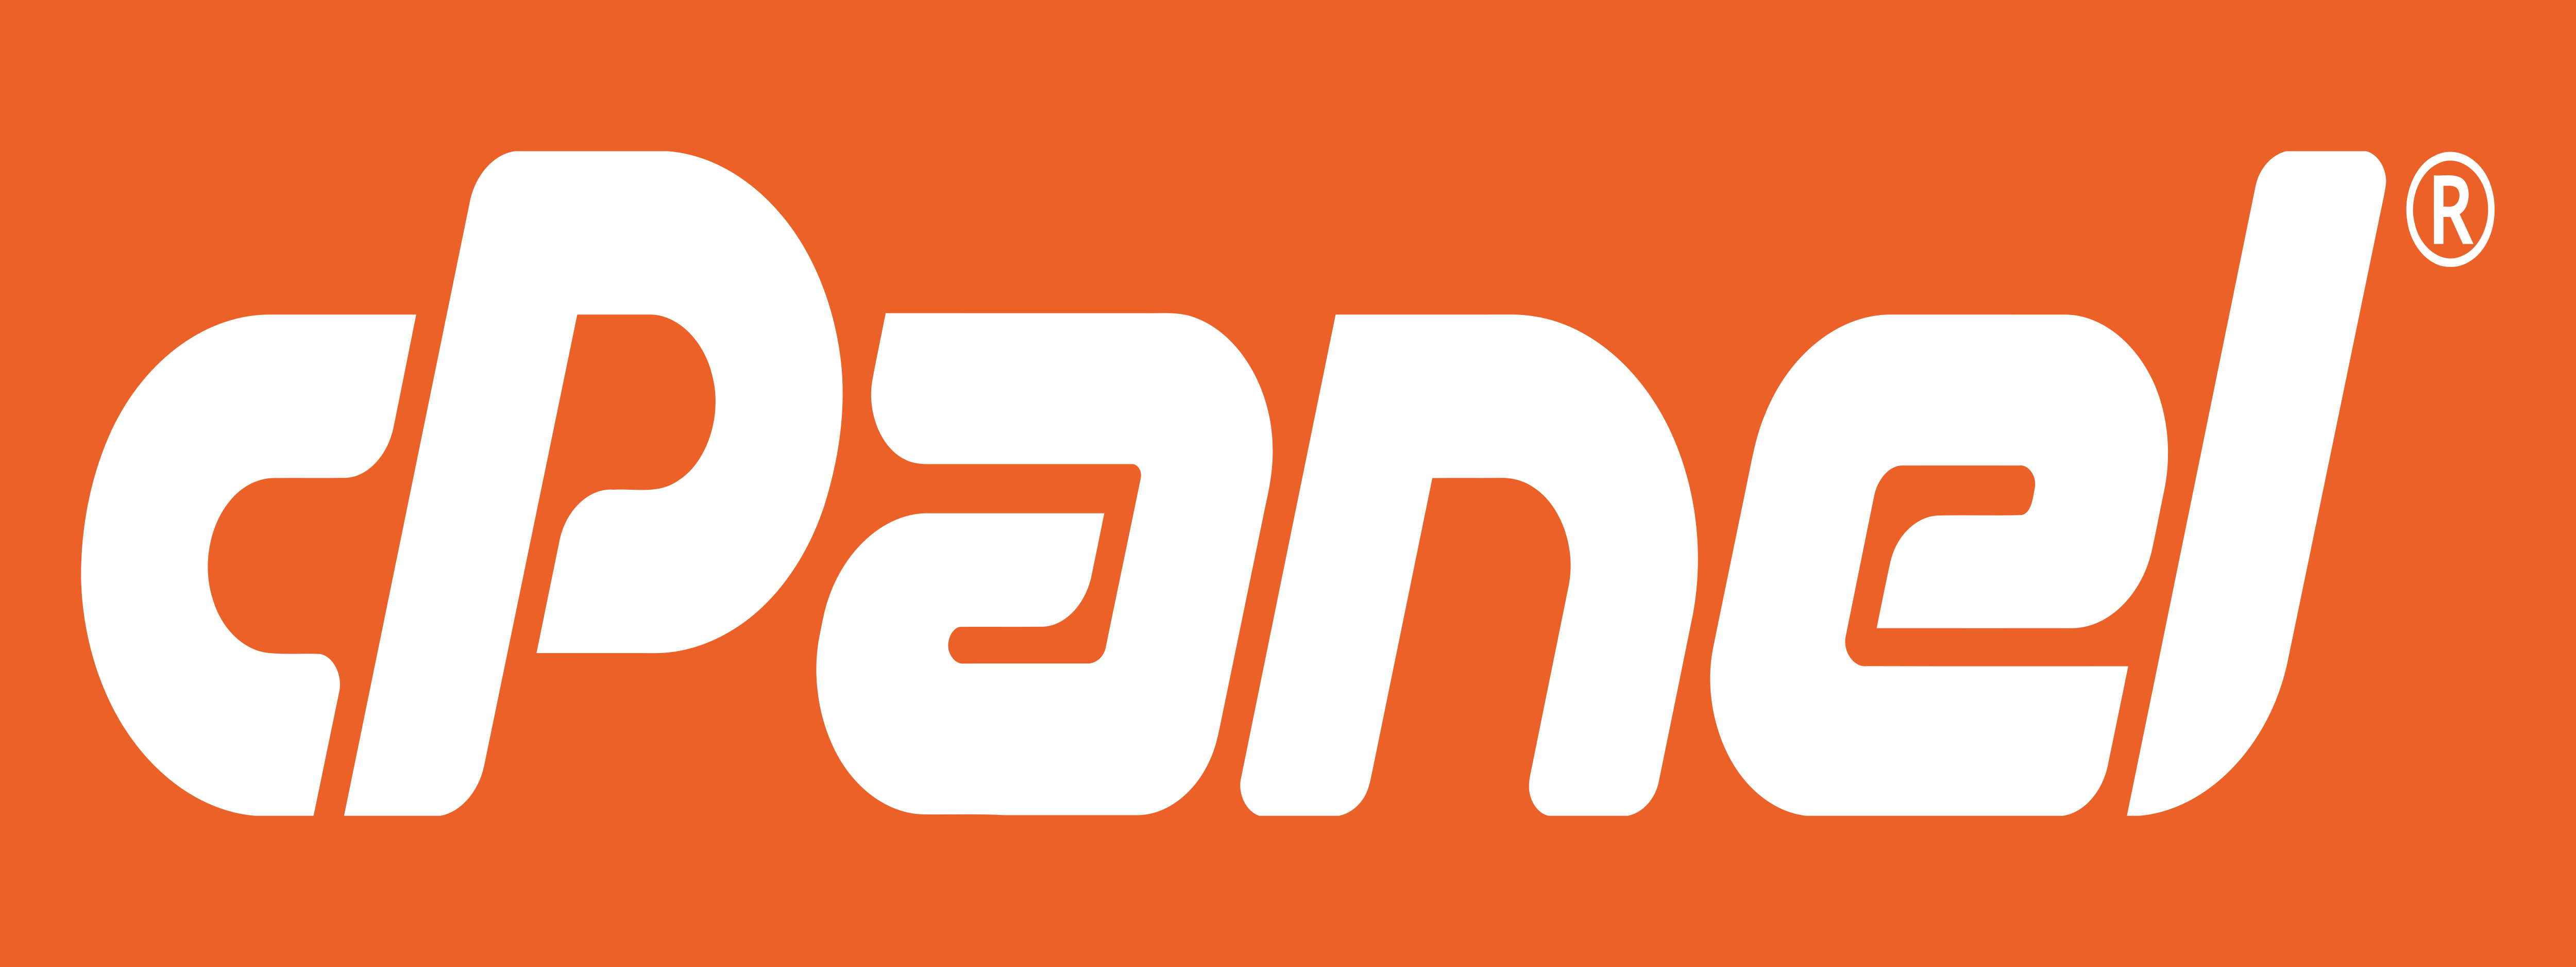 download cpanel for windows